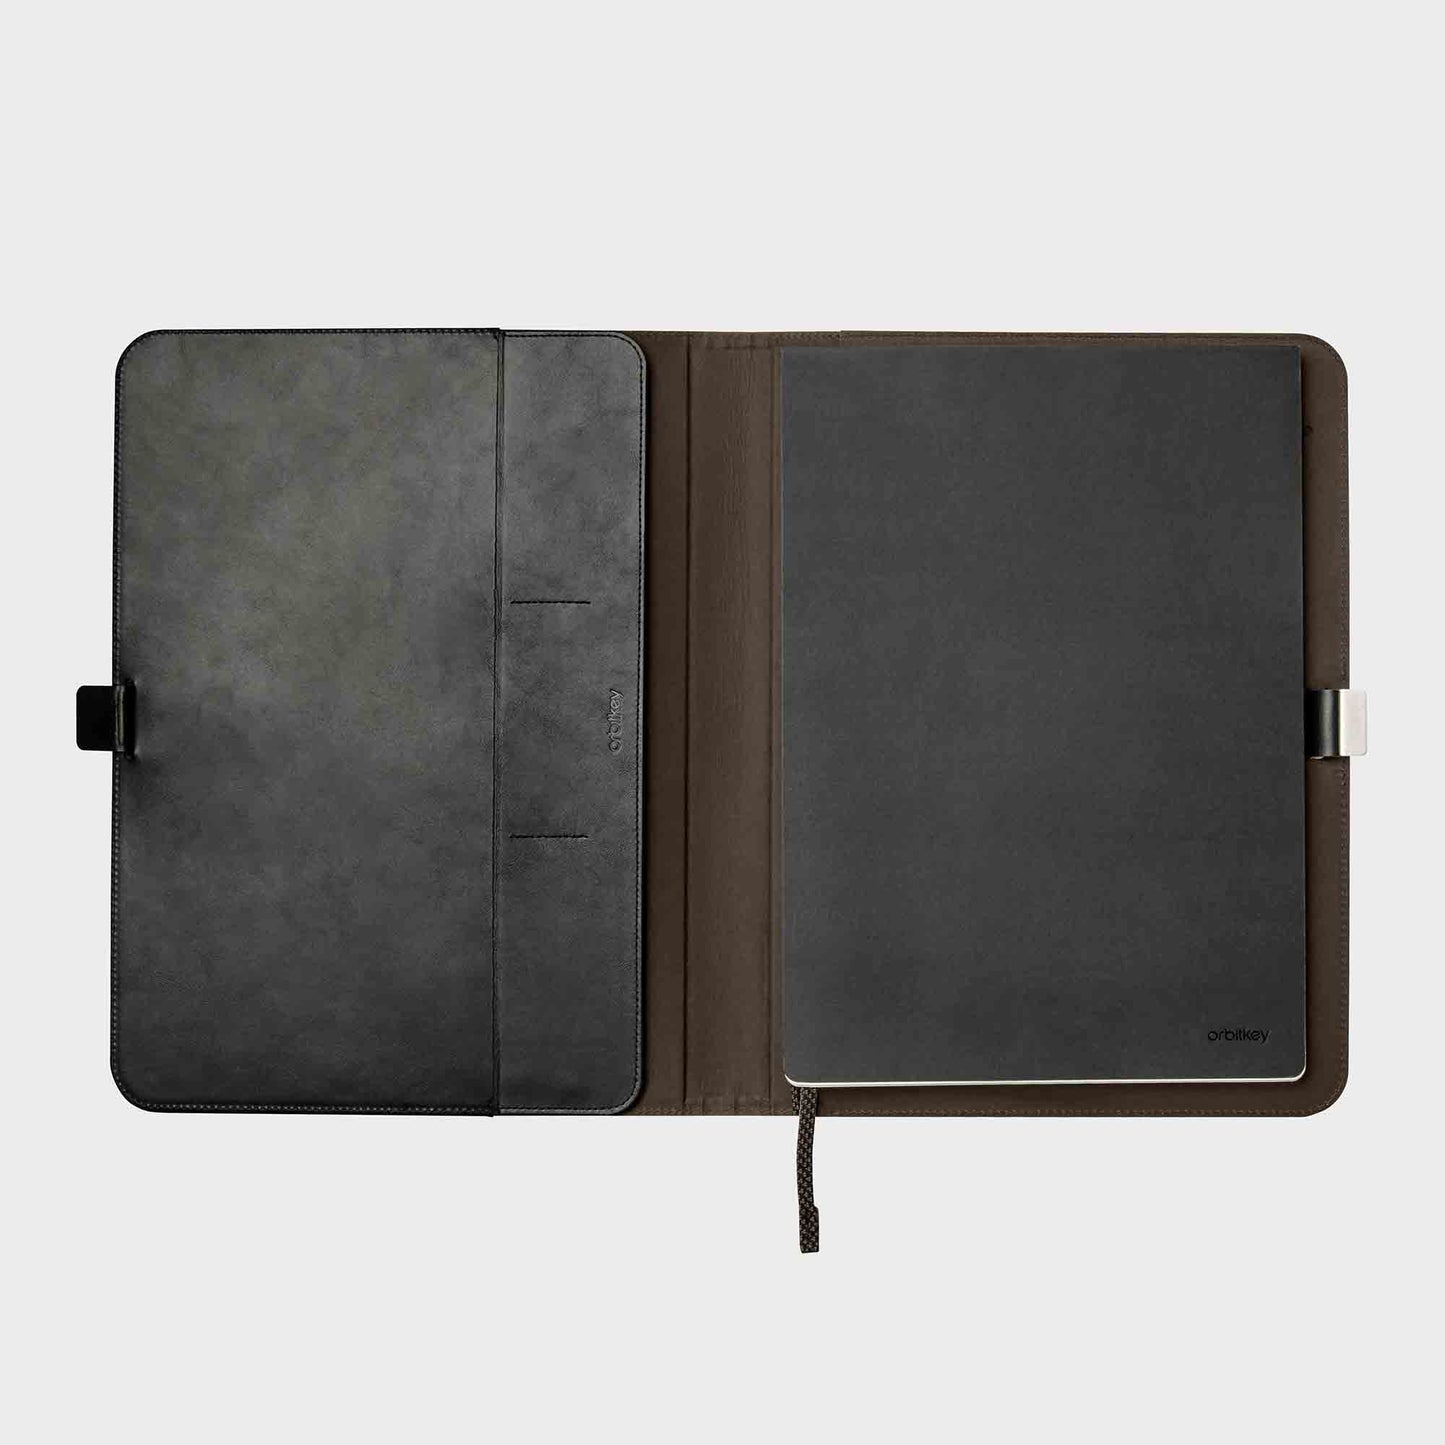 Genuine Leather Sleeve for Macbook. A simple design without zipper